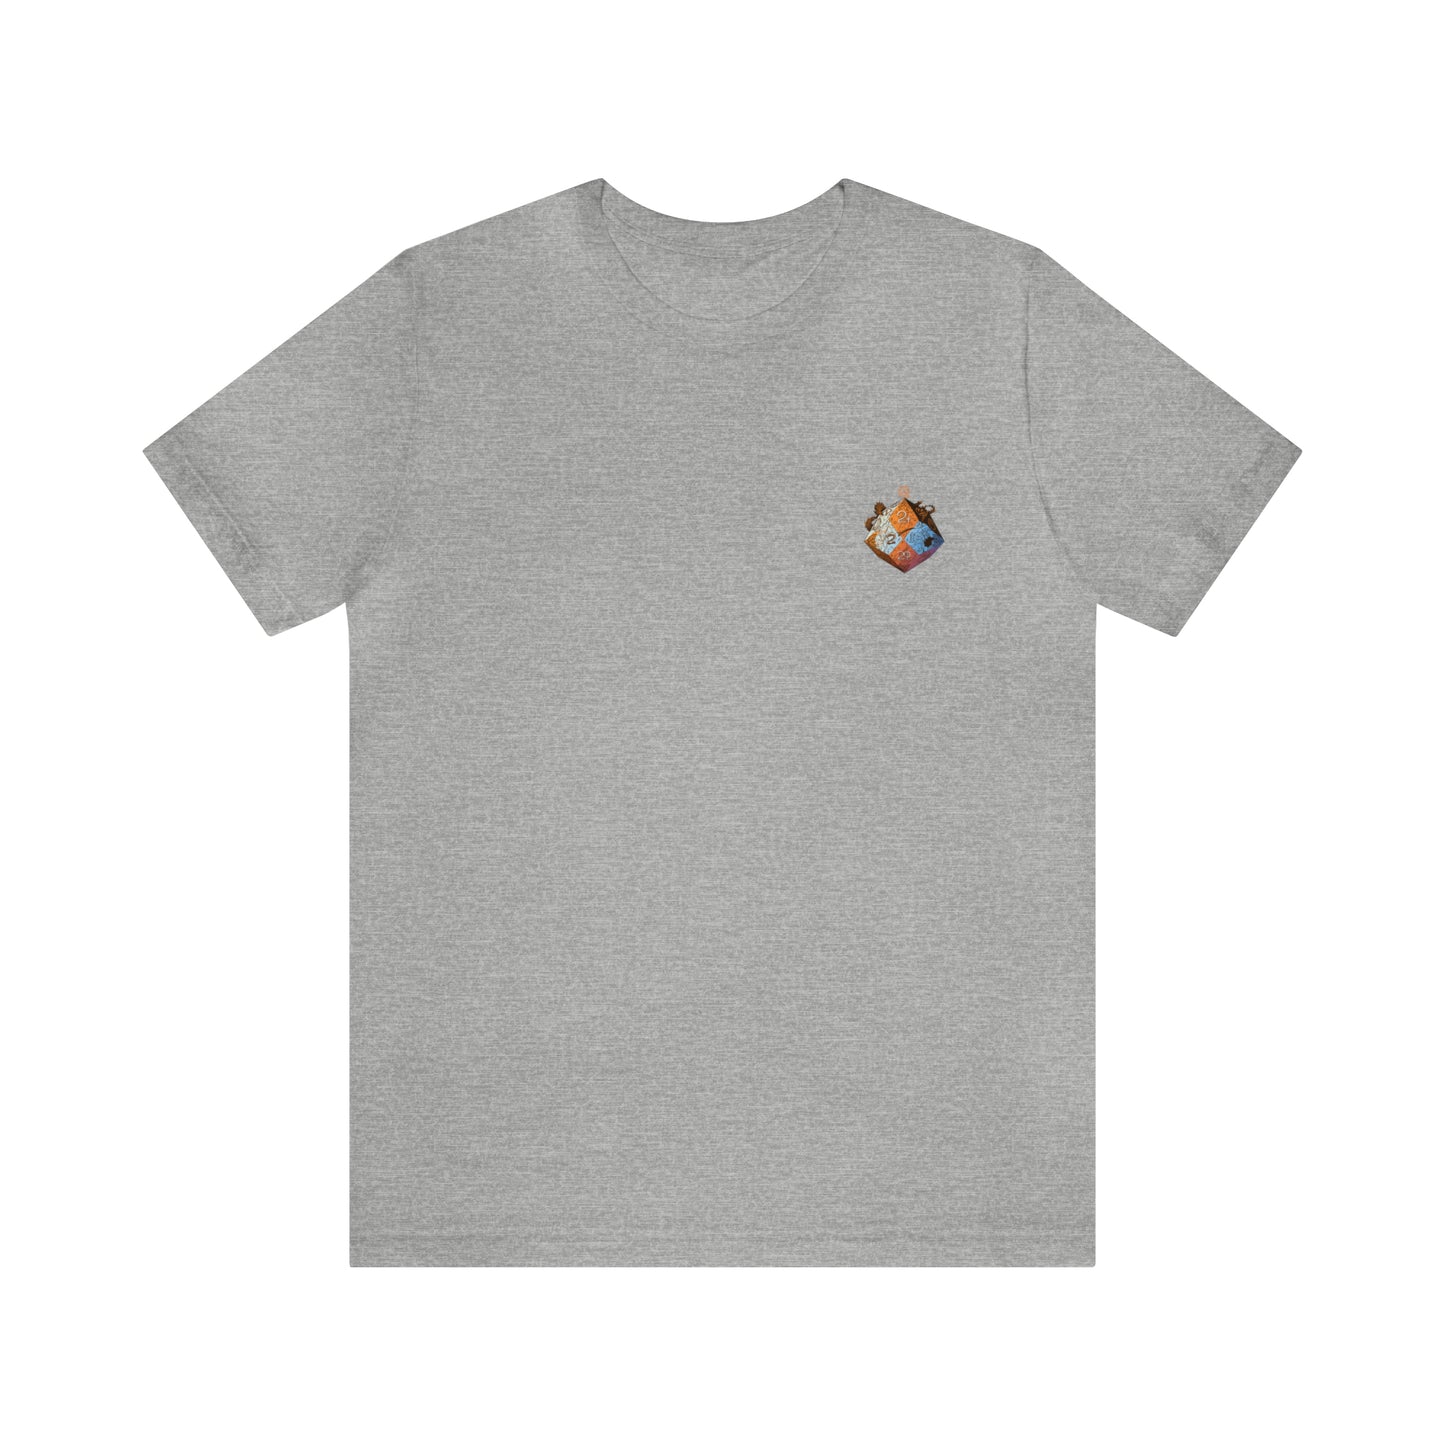 athletic-heather-quest-thread-tee-shirt-with-small-orange-blue-d20-dice-on-left-chest-of-shirt